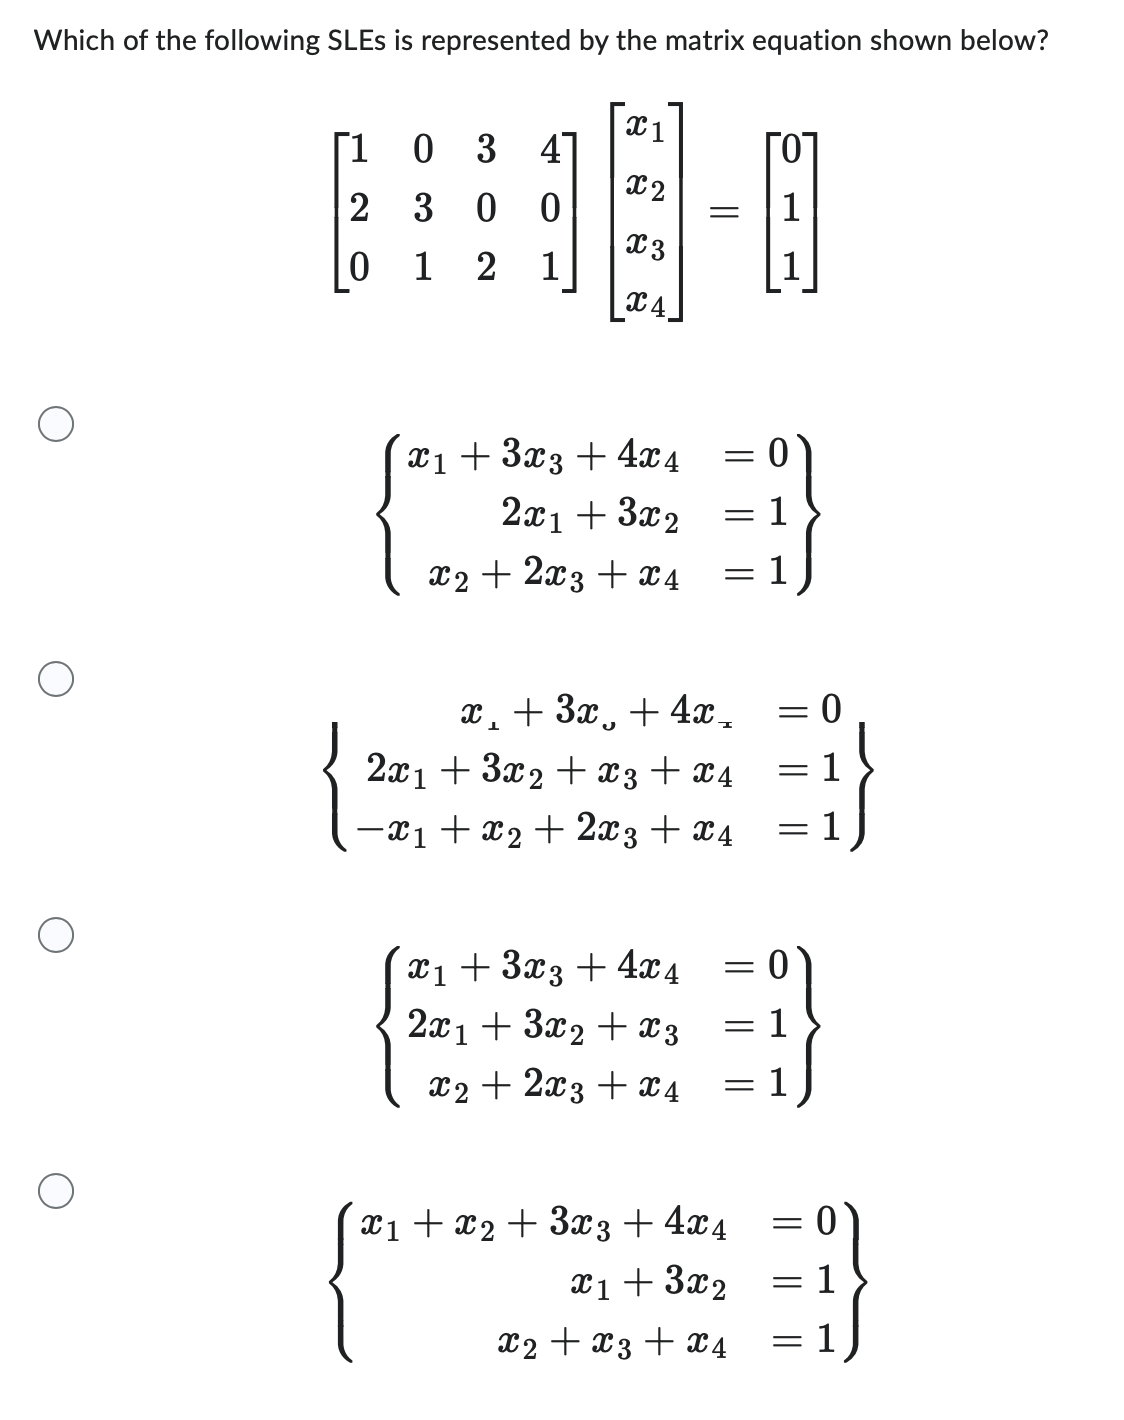 Which of the following SLEs is represented by the matrix equation shown below?
X1
x2
E-
X3
[1
2
0
03 41
3 00
12 1
C4.
x₁ + 3x3 + 4x4
2x₁ + 3x2
x2 + 2x3 + x4
= 1
x₁ + 3x3 + 4x4
2x1 + 3x₂ + x3
x2 + 2x3 + x 4
1
= 1
x₂ + 3x + 4x_
2x1 +3x2 + x3 + X4
−x1 + x2 + 2x3 + x4
=
=
x₁ + x2 + 3x3+4x4
x₁ + 3x2
x2 + x3 + x4
= 0
= 1
= 1
-
=
1
=